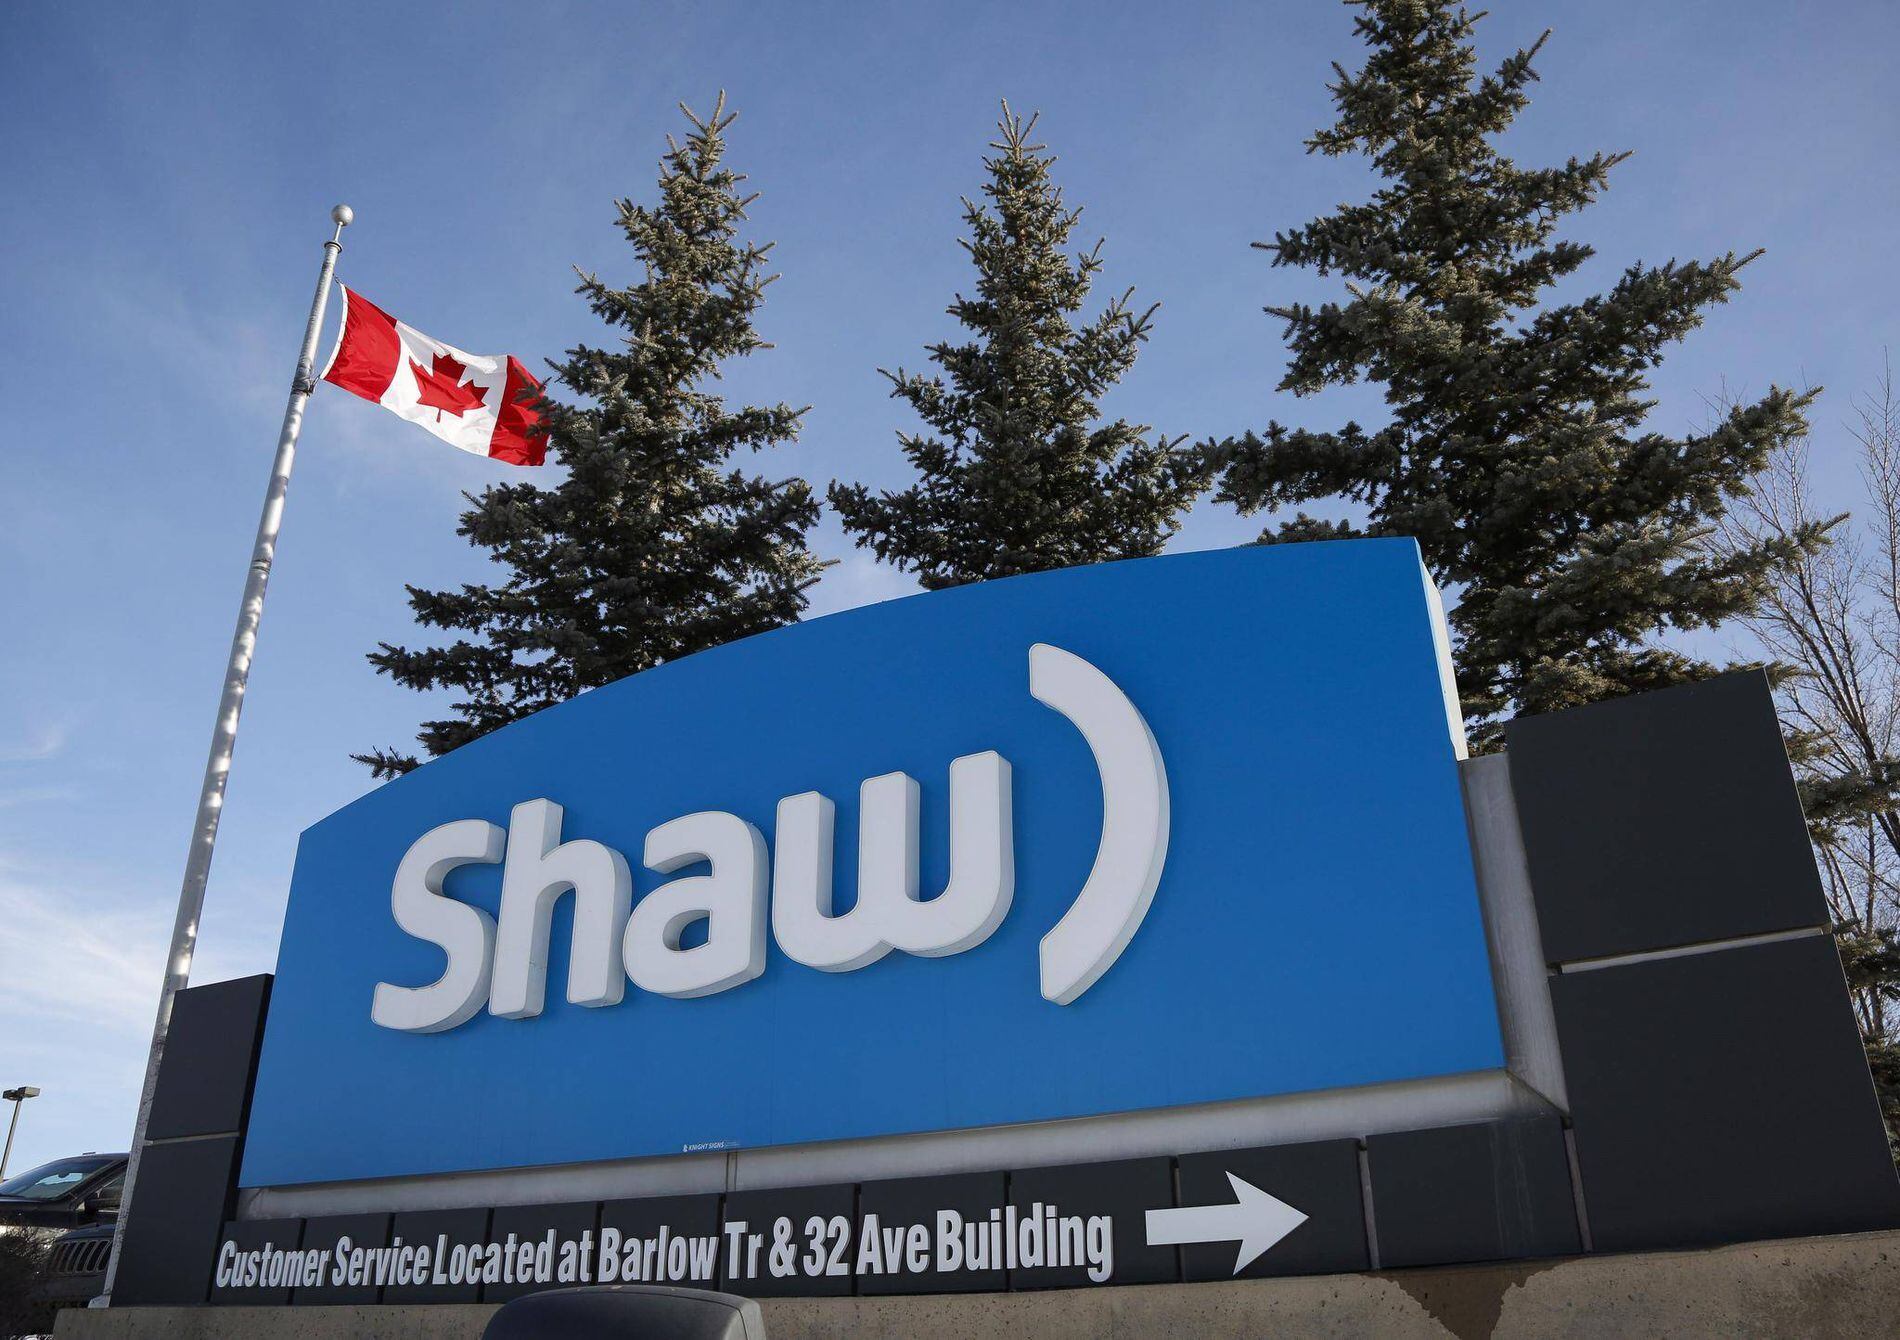 shaw cable travel channel